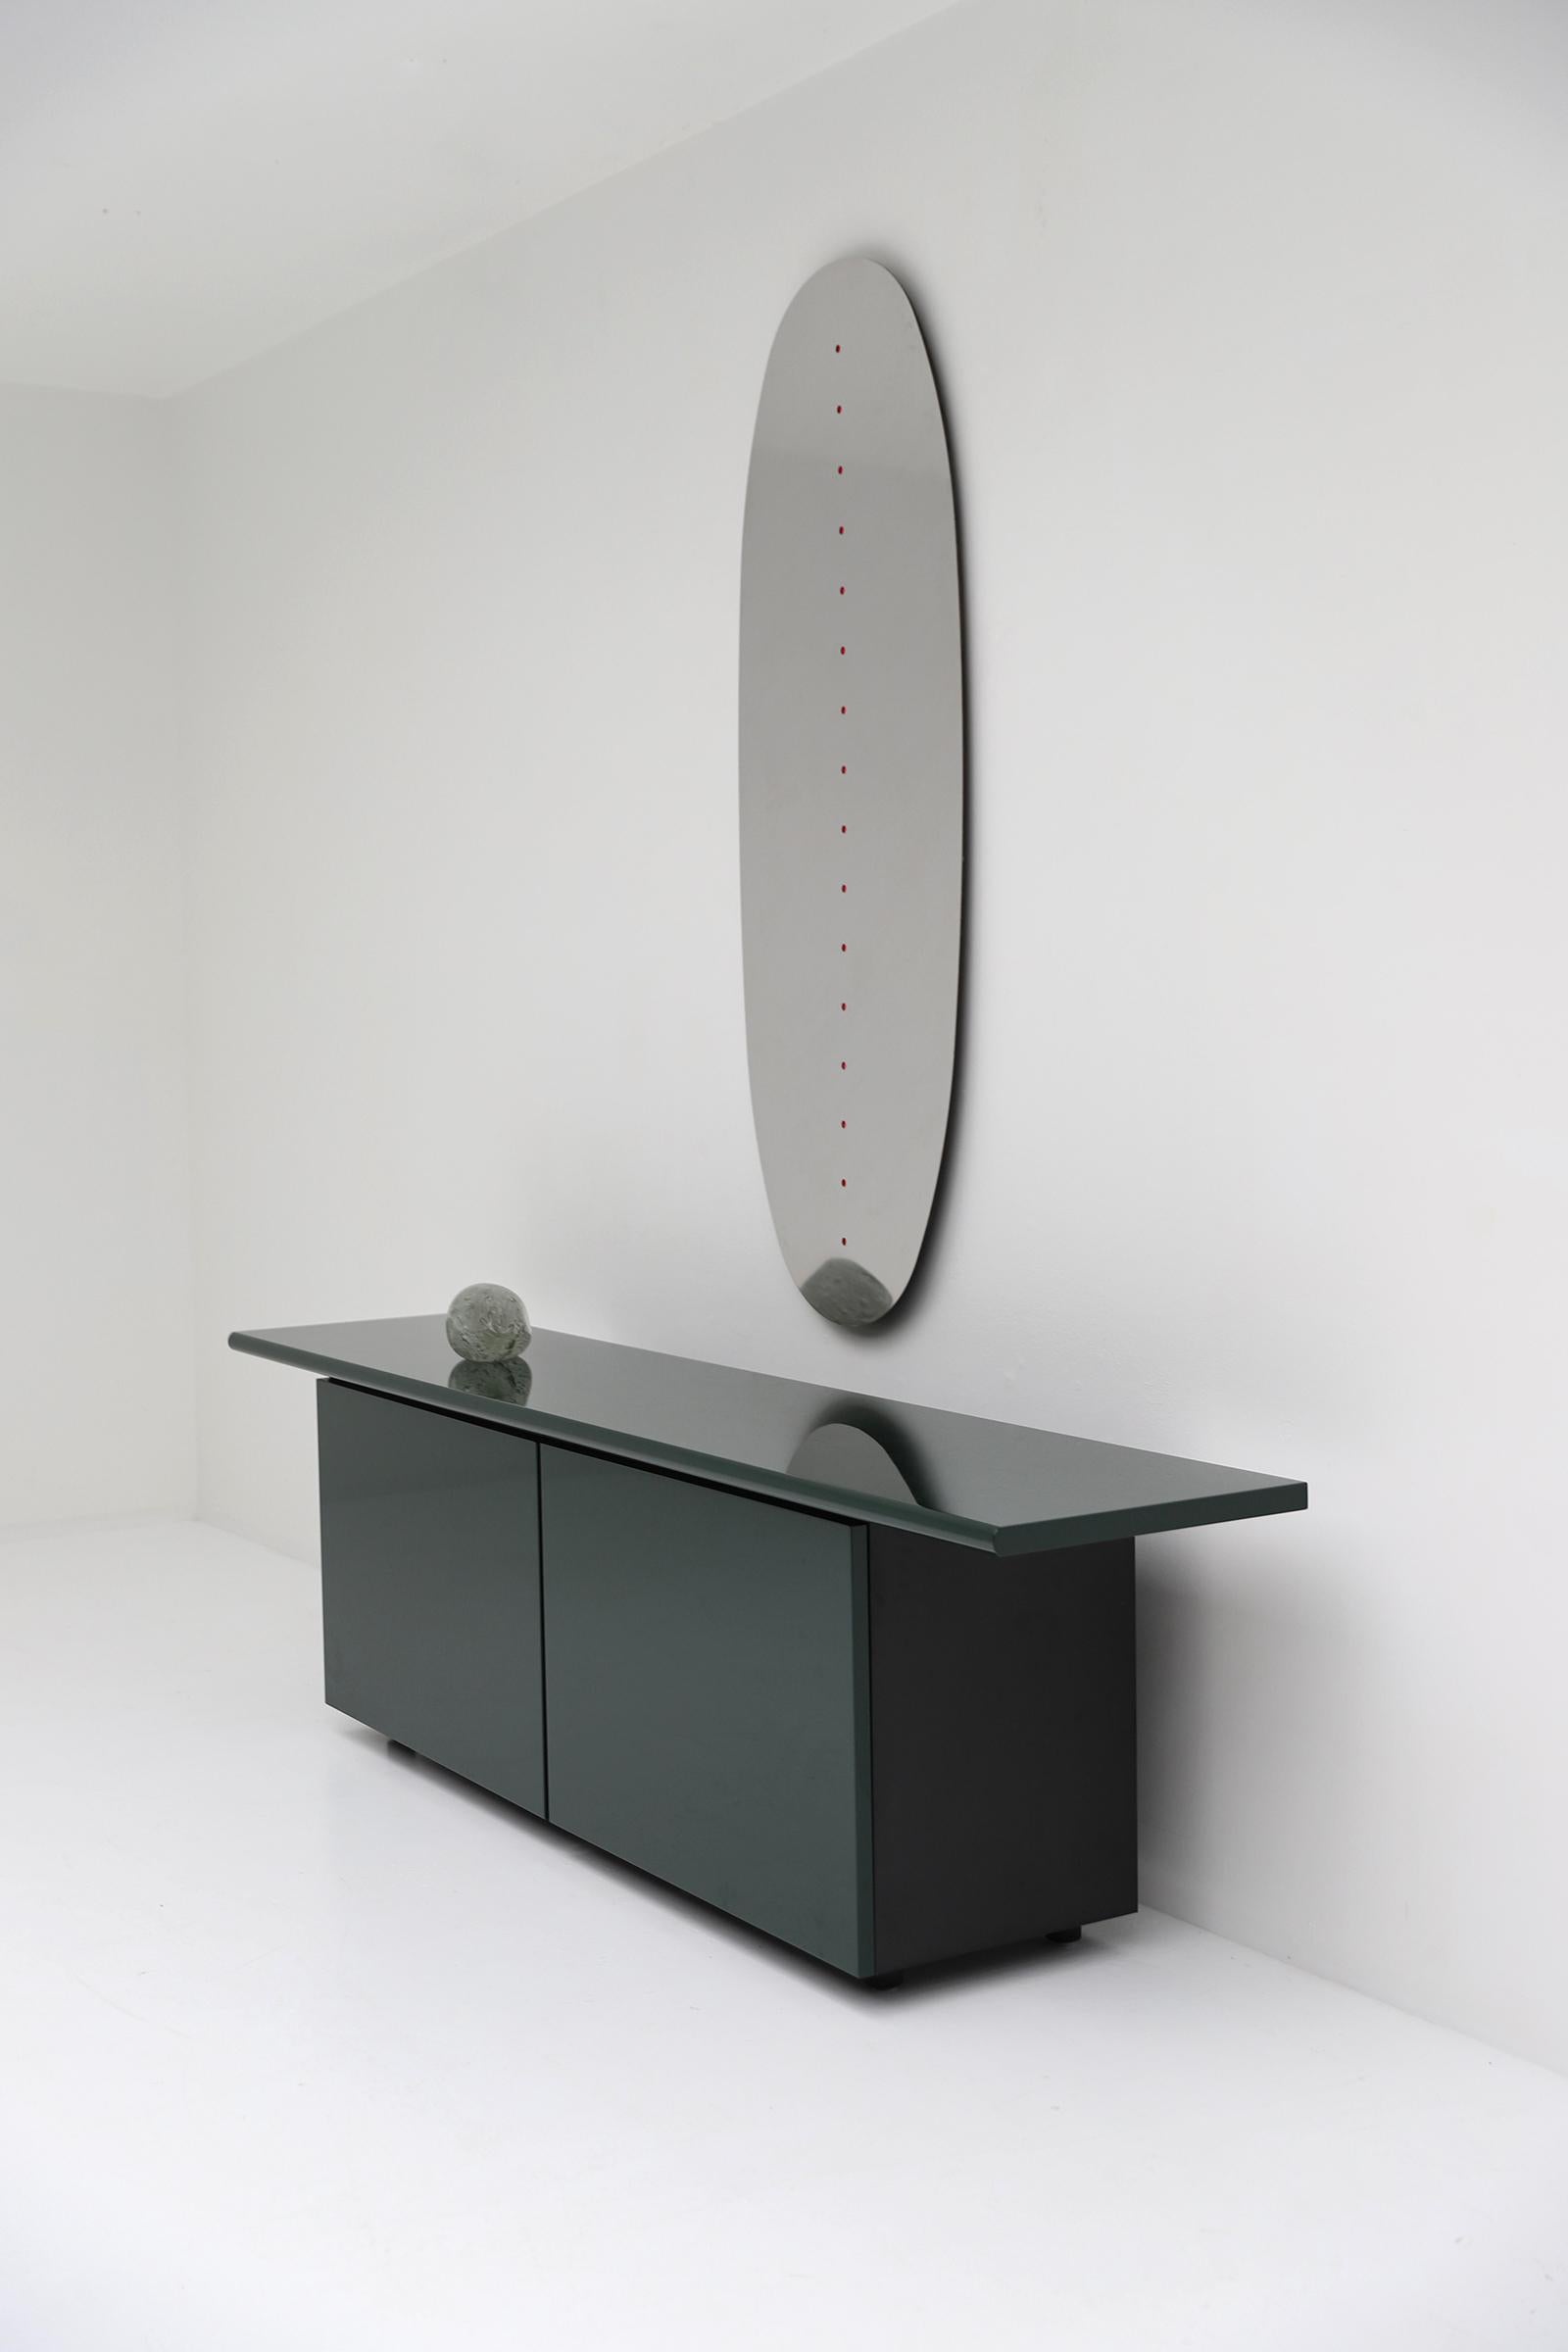 Late 20th Century Green Lacquered Sheraton Sideboard by Giotto Stoppino for Acerbis 1977